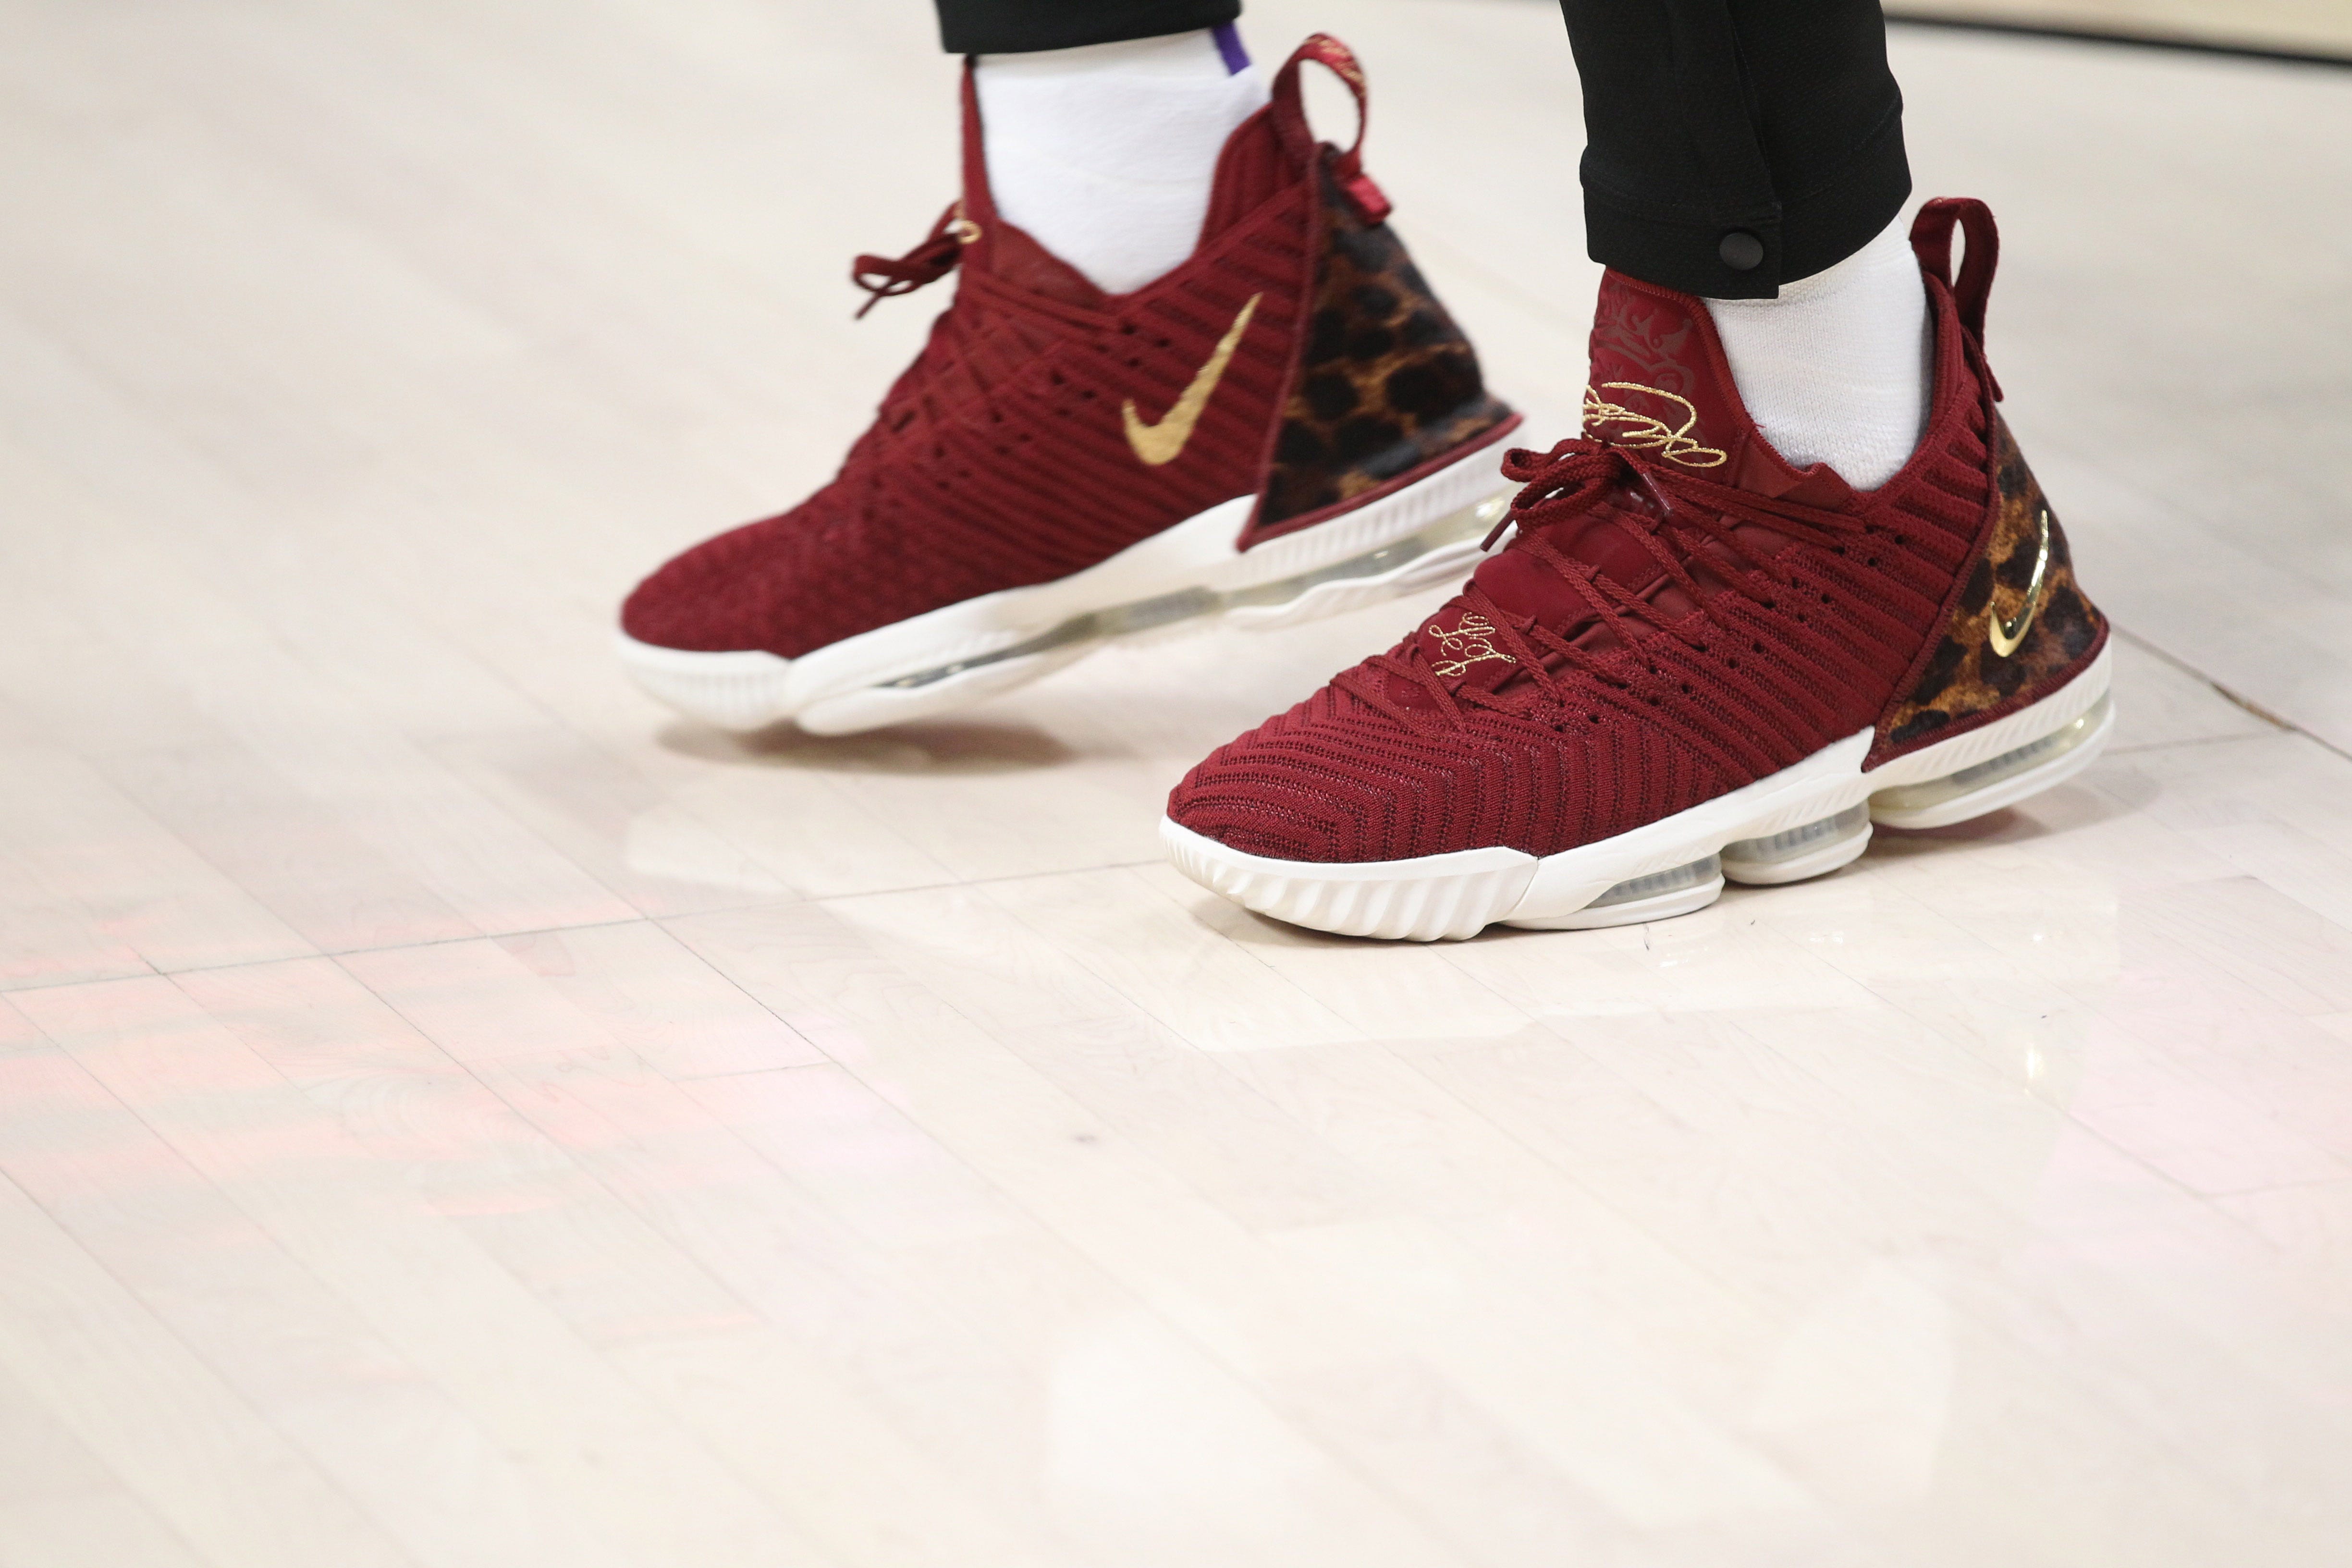 nike cleveland cavaliers shoes